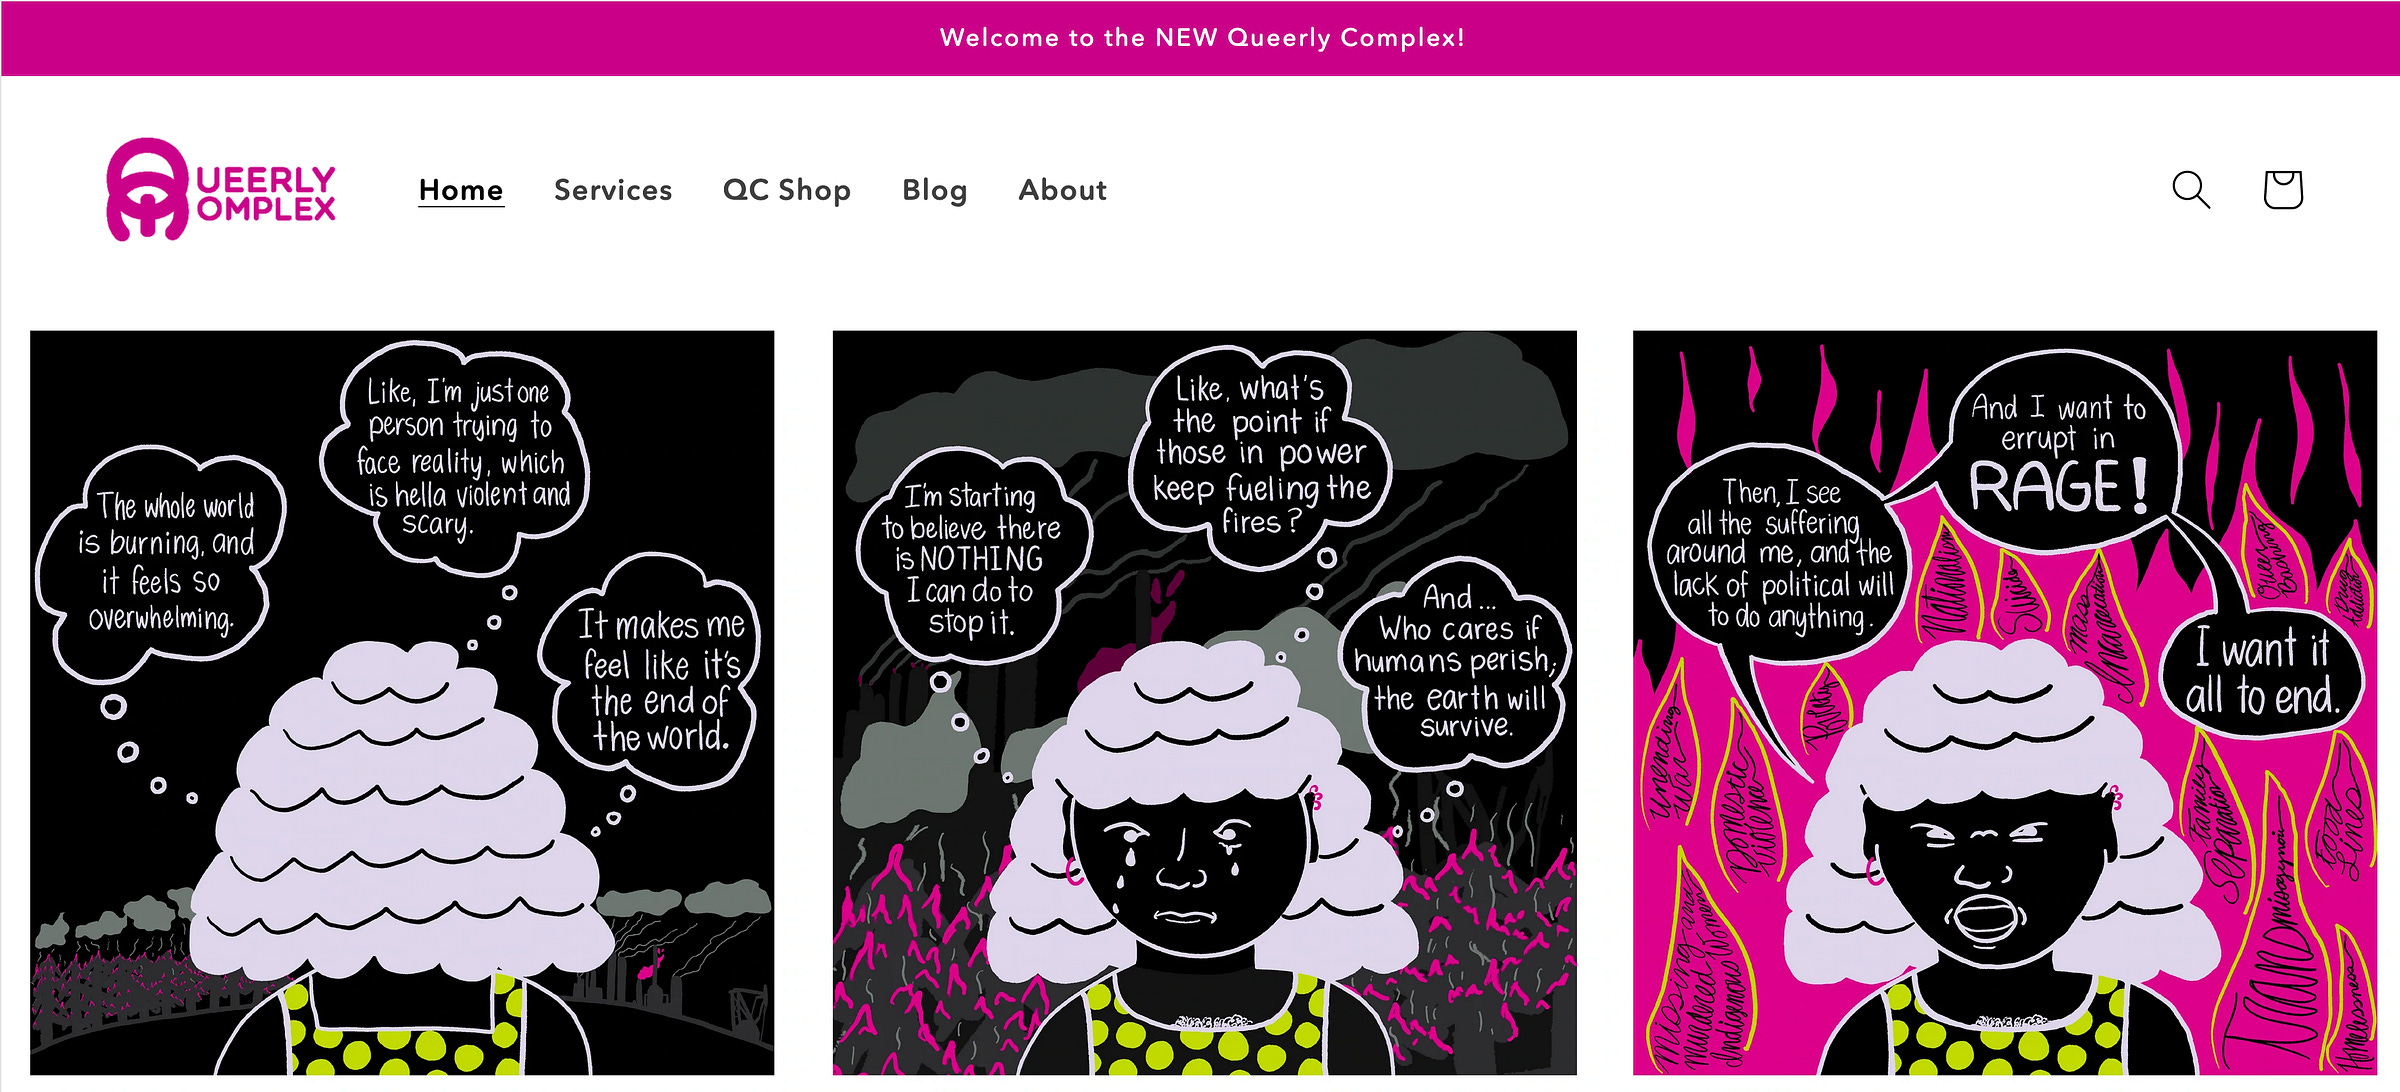 The new Queerly Complex Landing Page with a Comic Strip that expresses deep greif and flaming rage at the state of the world on fire from transmisogynoir, poverty, unending war, domestic violence, suicide, nationalism, cfamily separation, missing and murdered indigenous women, mass incarceration, queer basing, homeslessness, and drug abuse. The non-binary main character wants to errupt in rage and wants it all to end. 